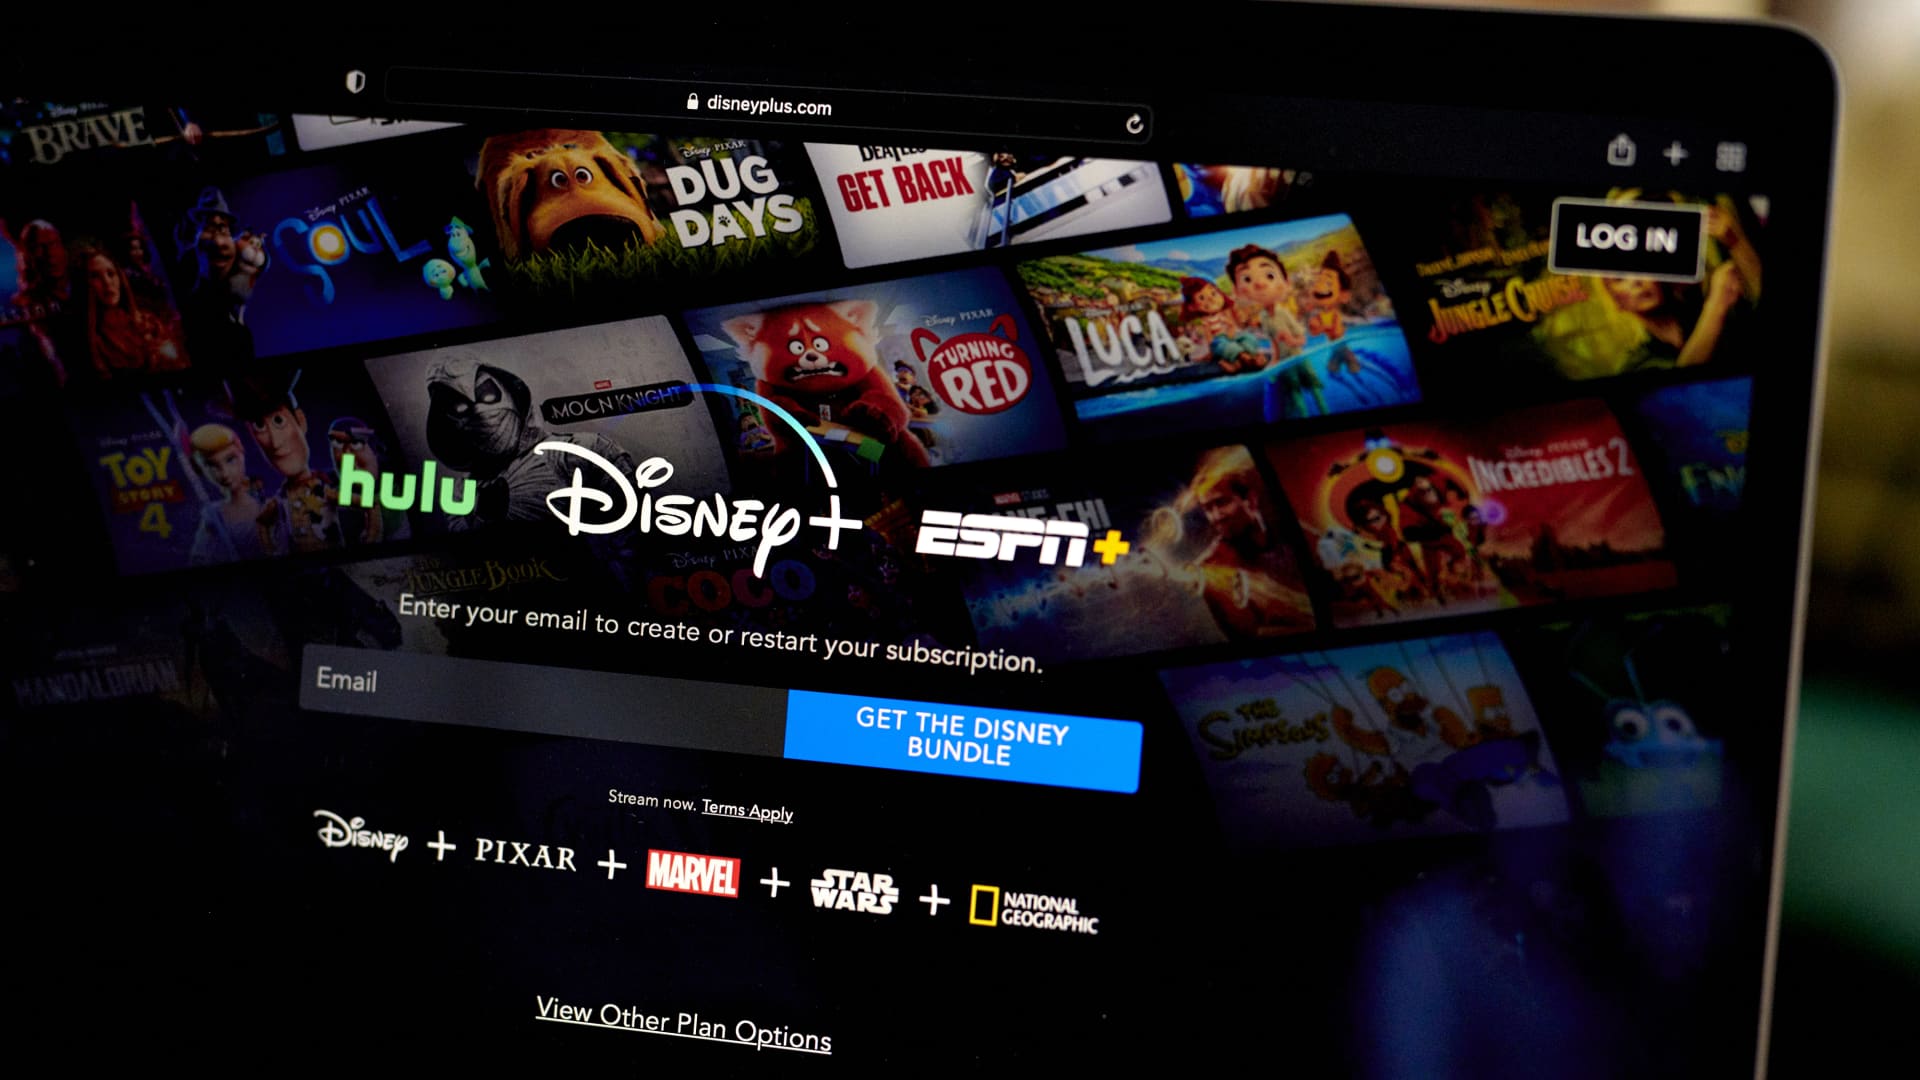 Don’t expect cable TV-like package for streaming services any time soon